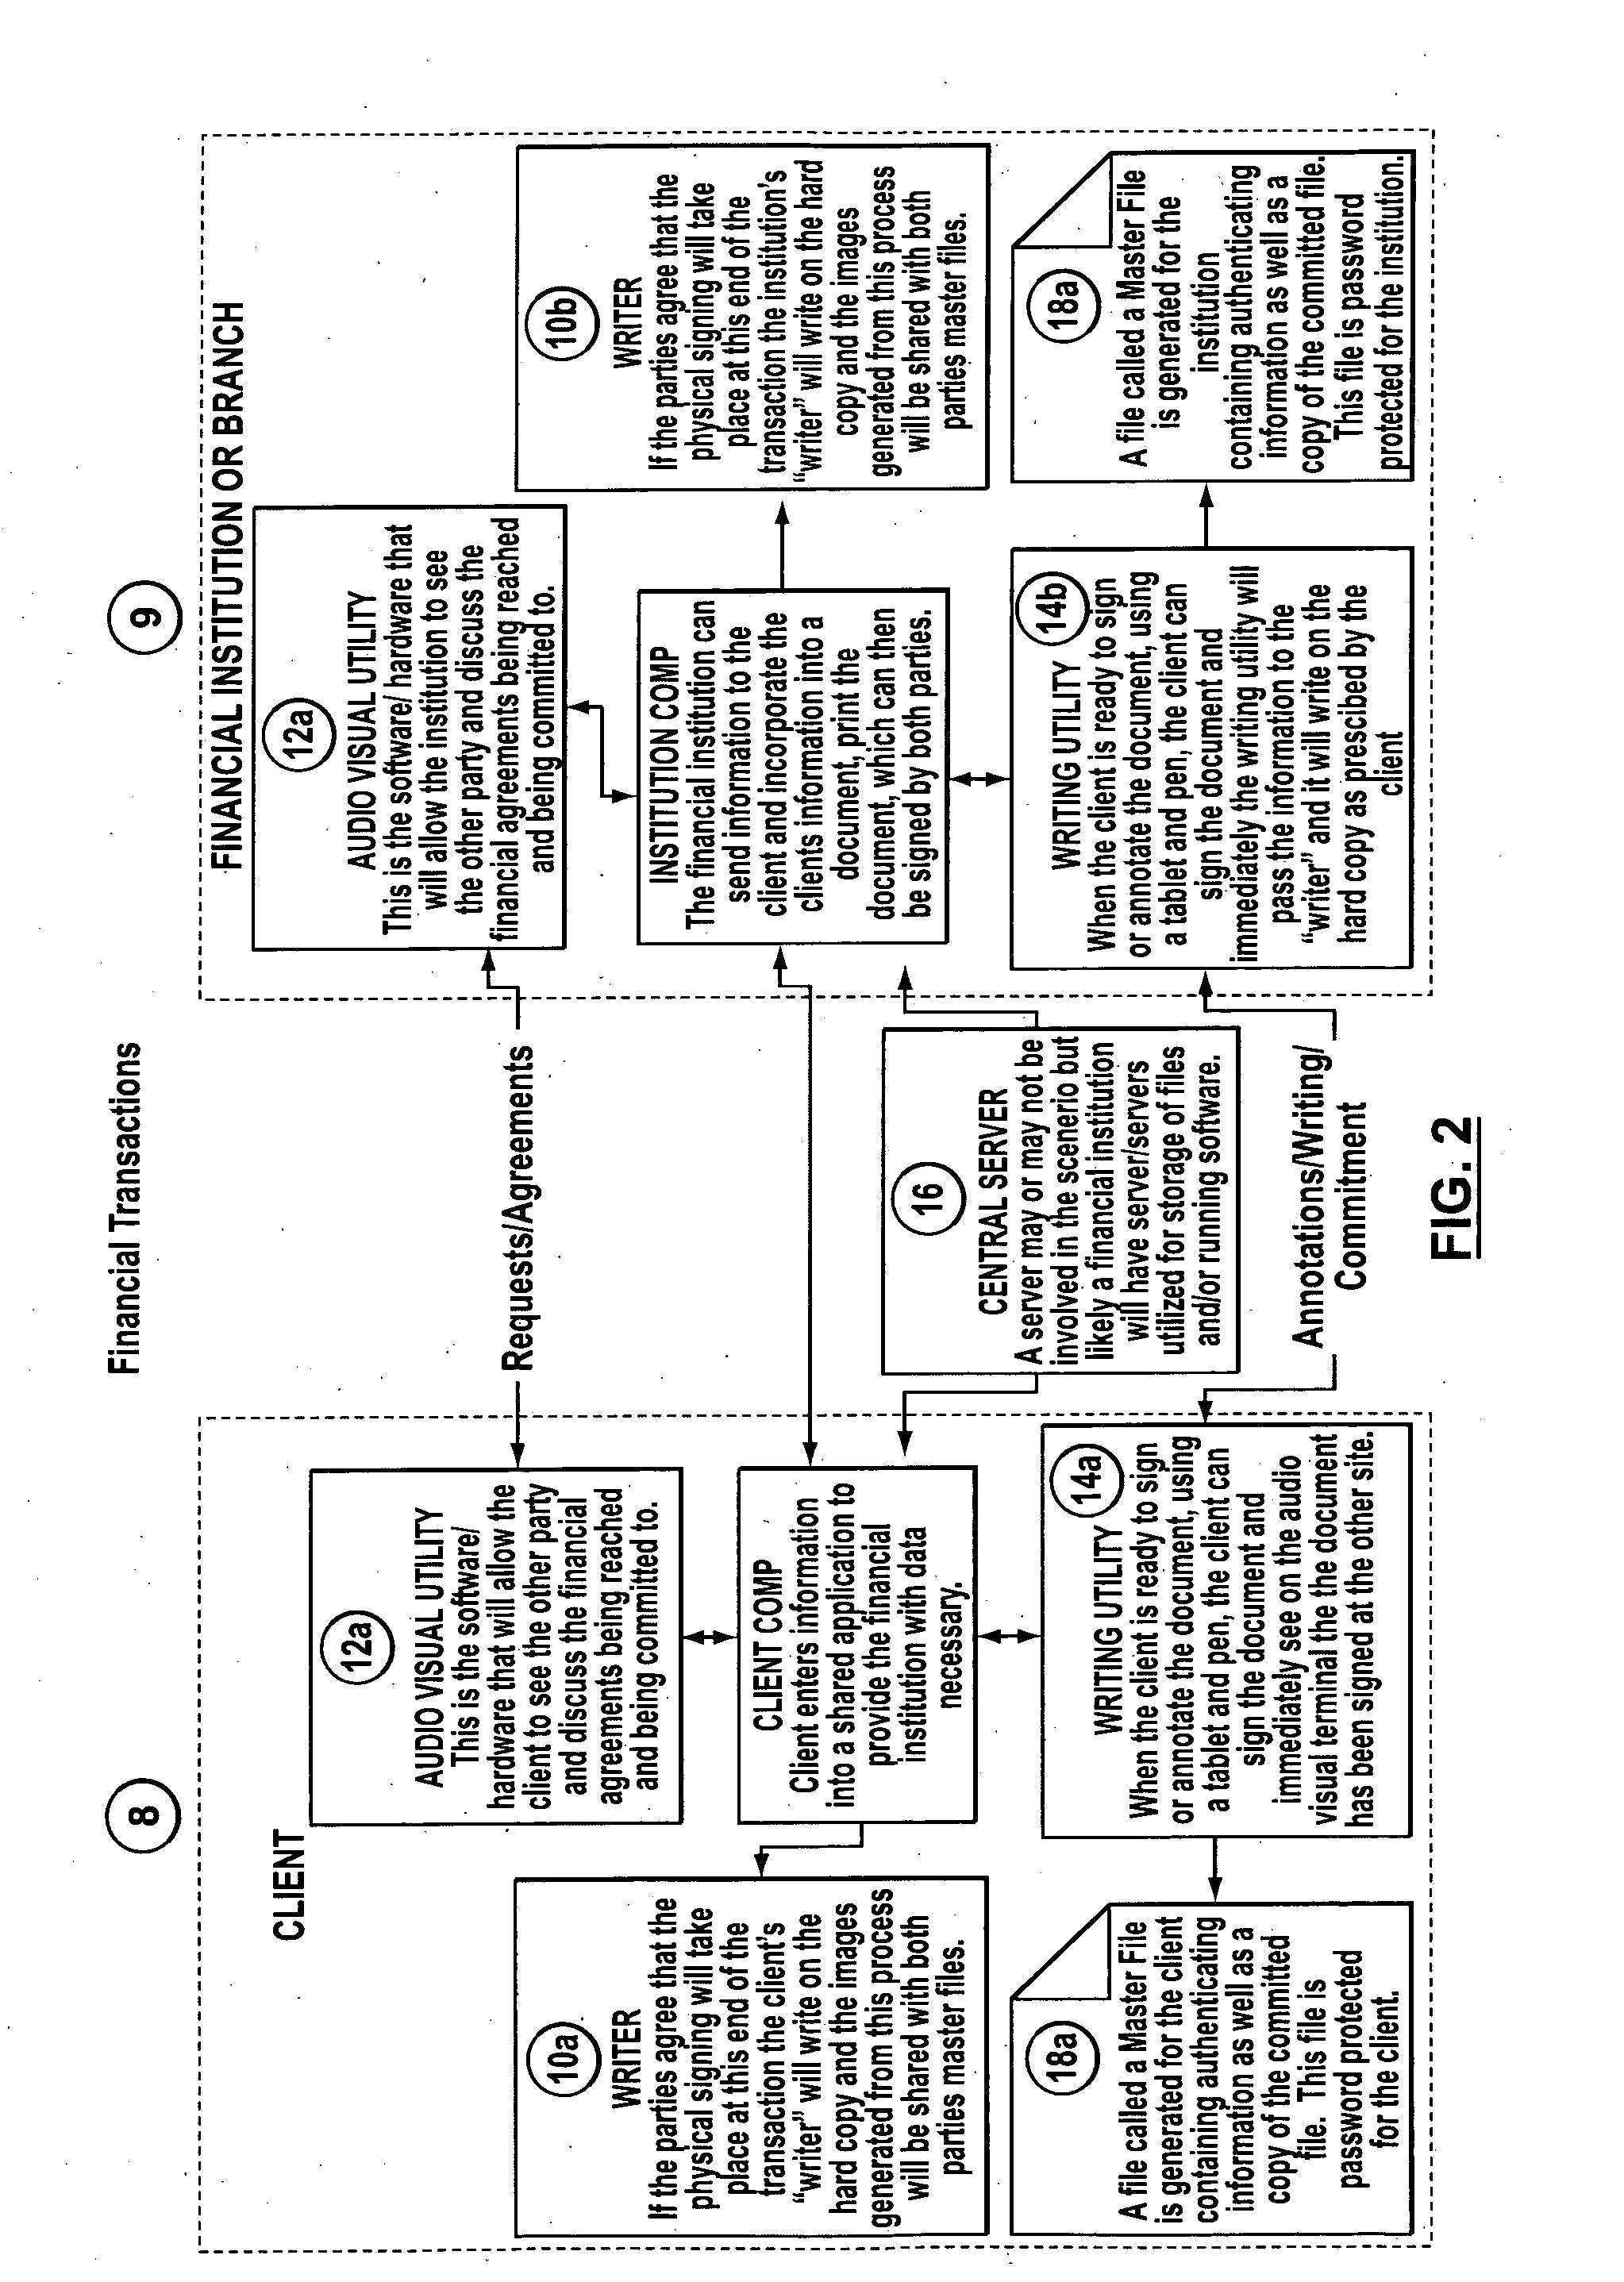 System, method and computer program, for enabling entry into transactions on a remote basis